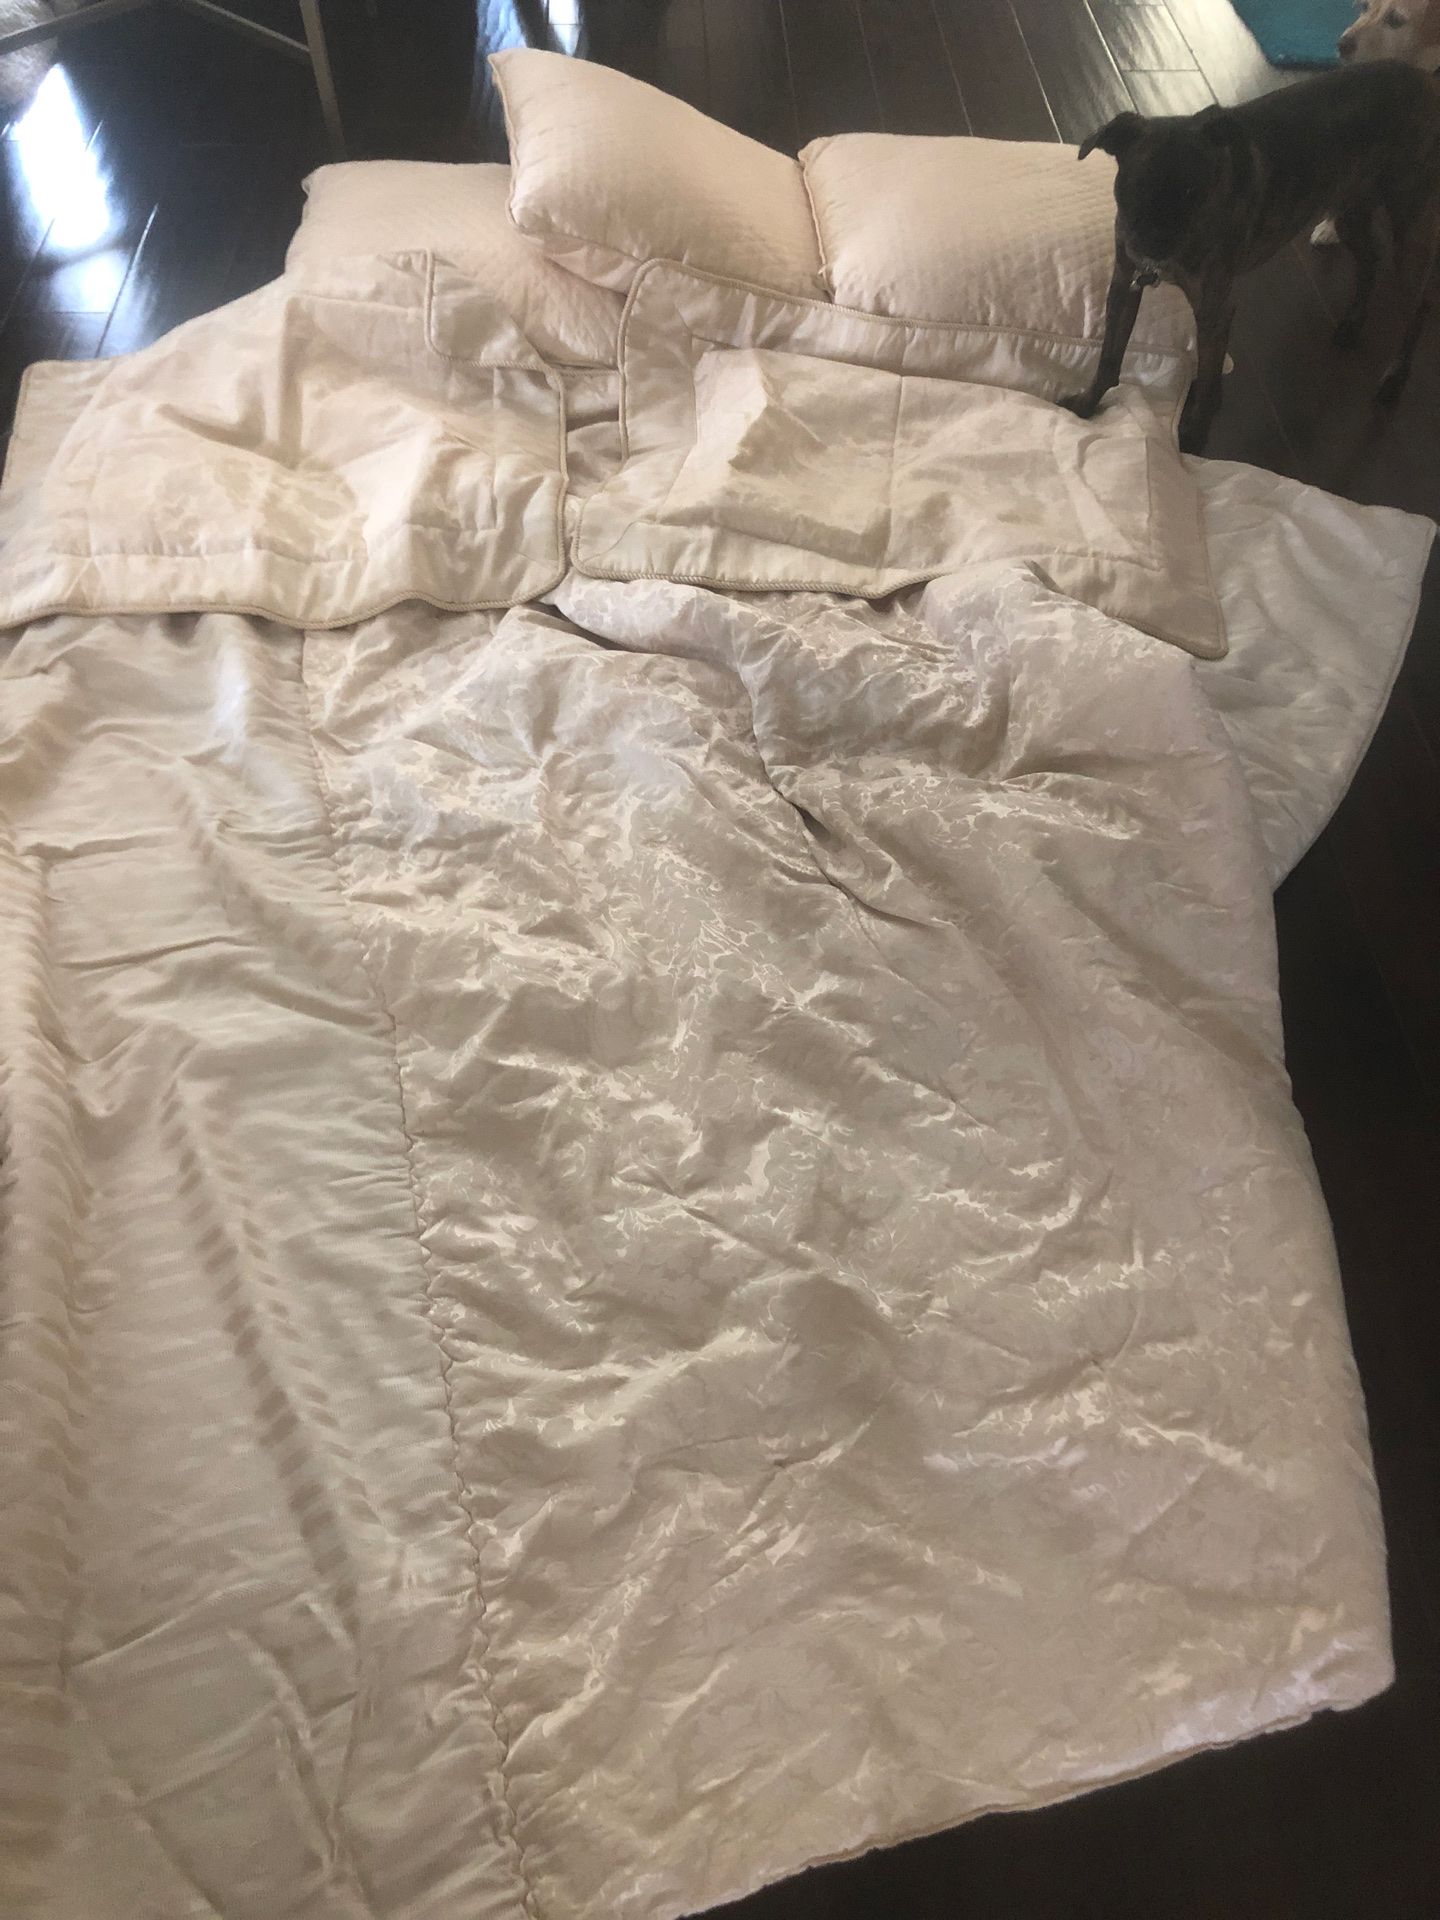 King quality expensive heavy bead spread, 2 shams cases and 3 big bed pillows